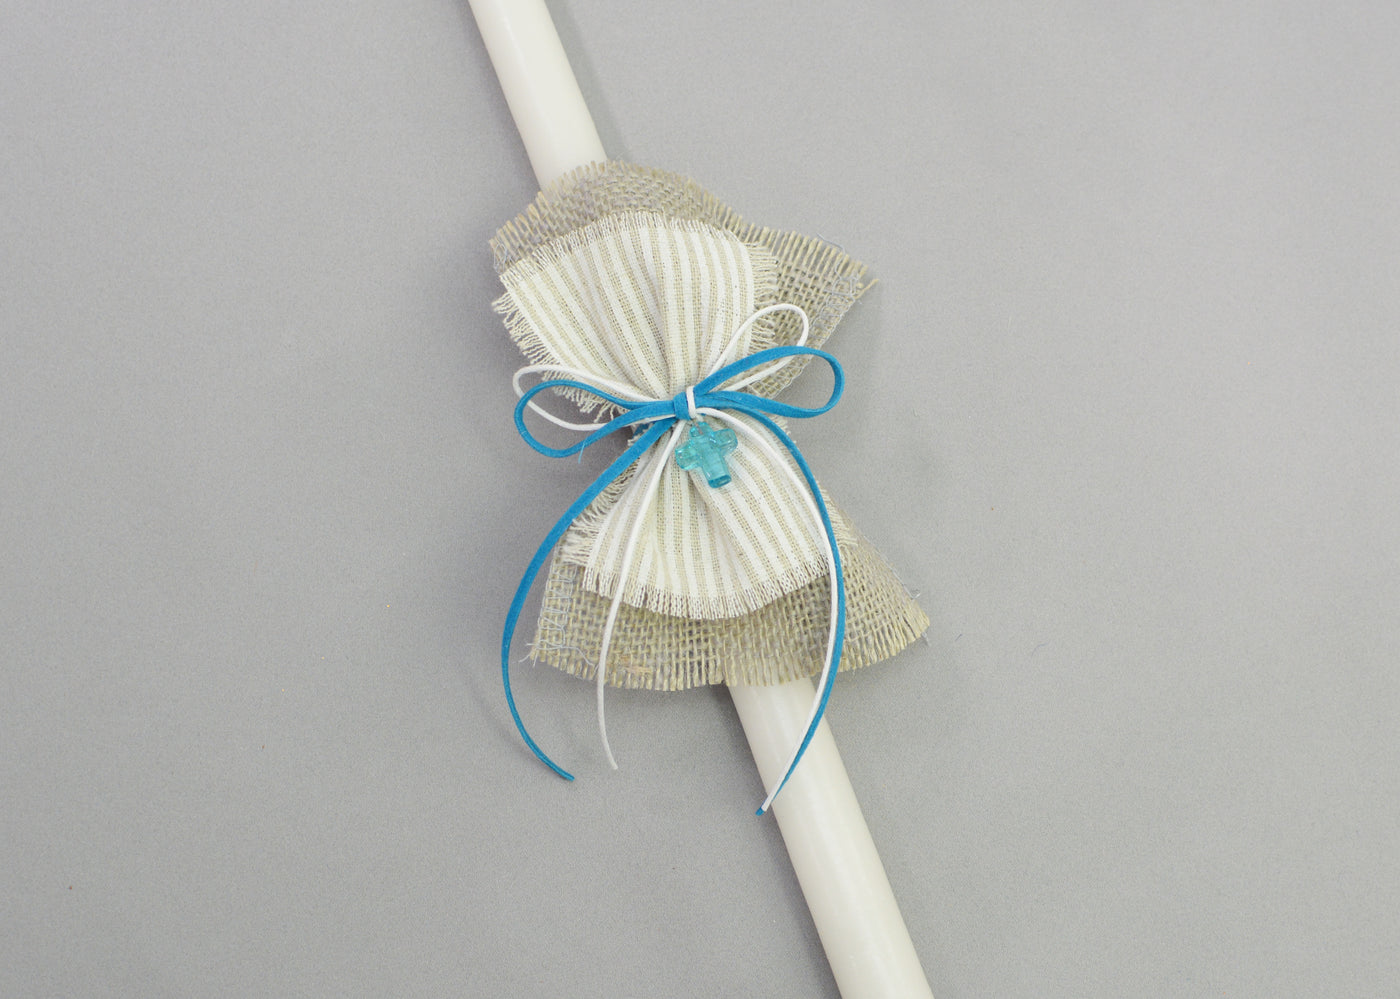 Striped Bows Easter Candles